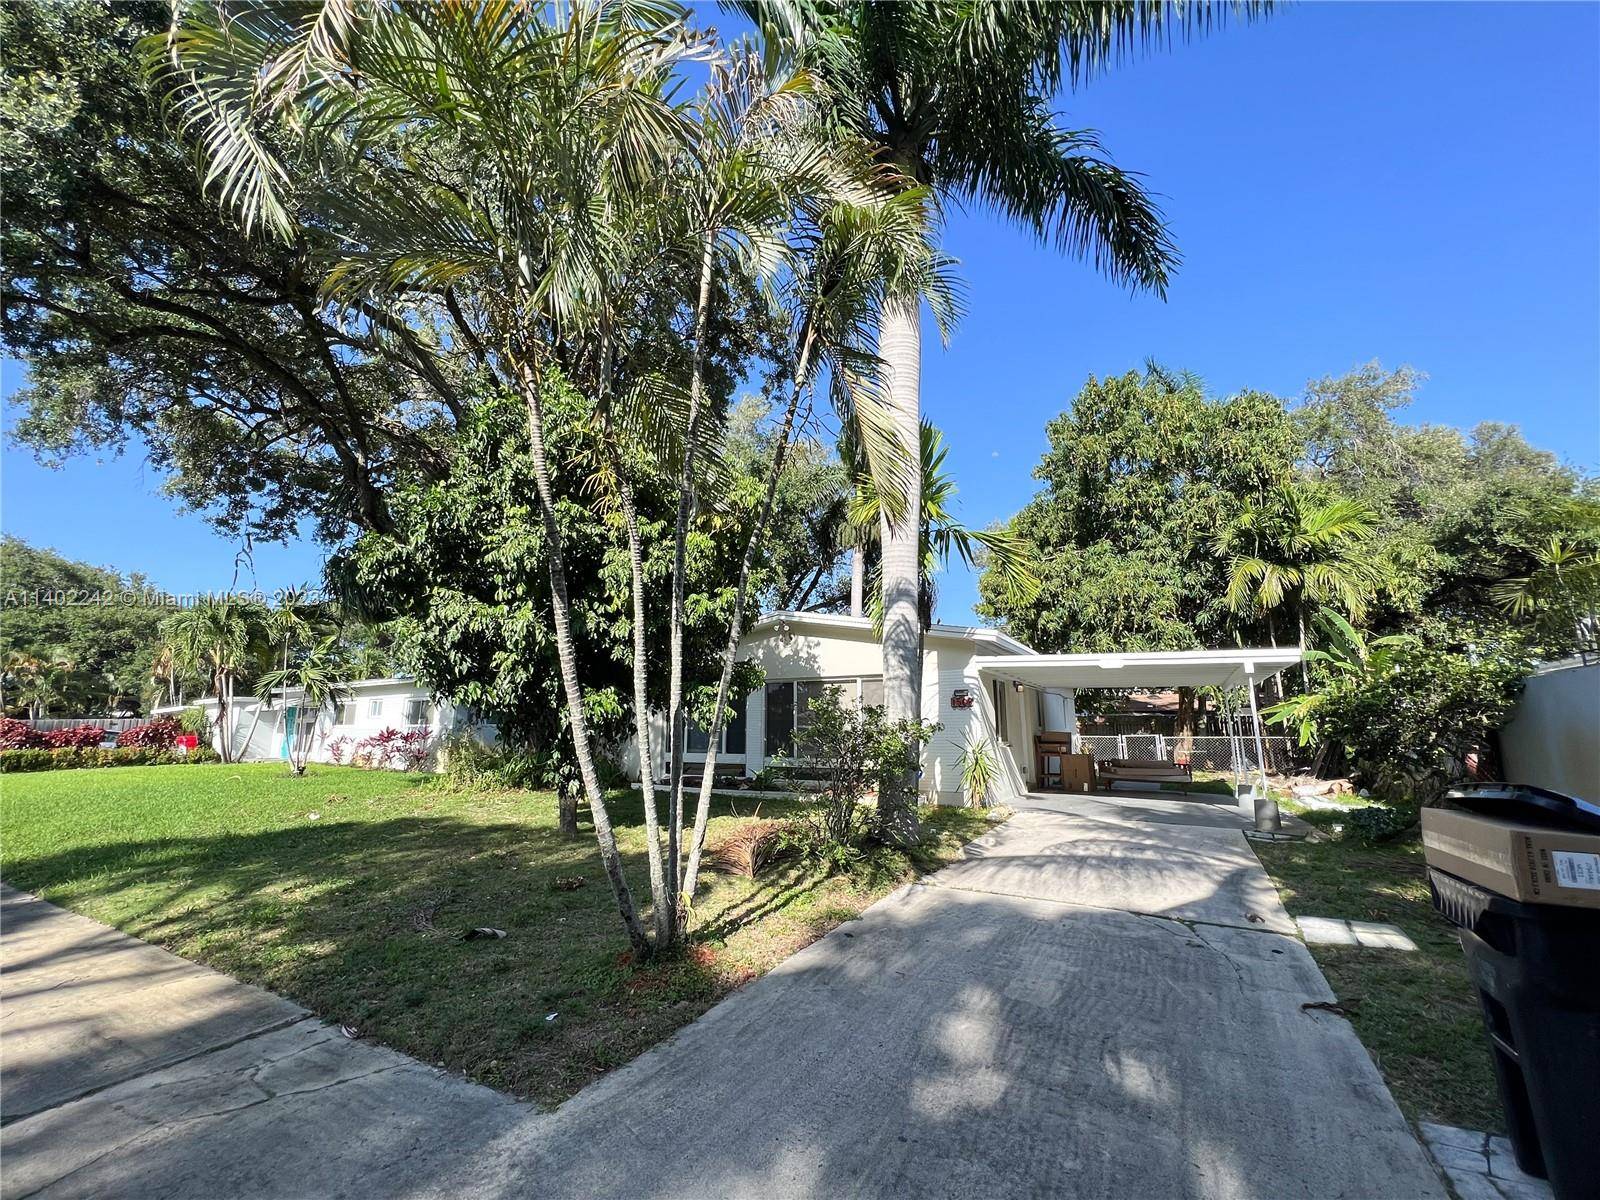 Fully furnished private paradise in the middle of the famous Shady Banks neighborhood.